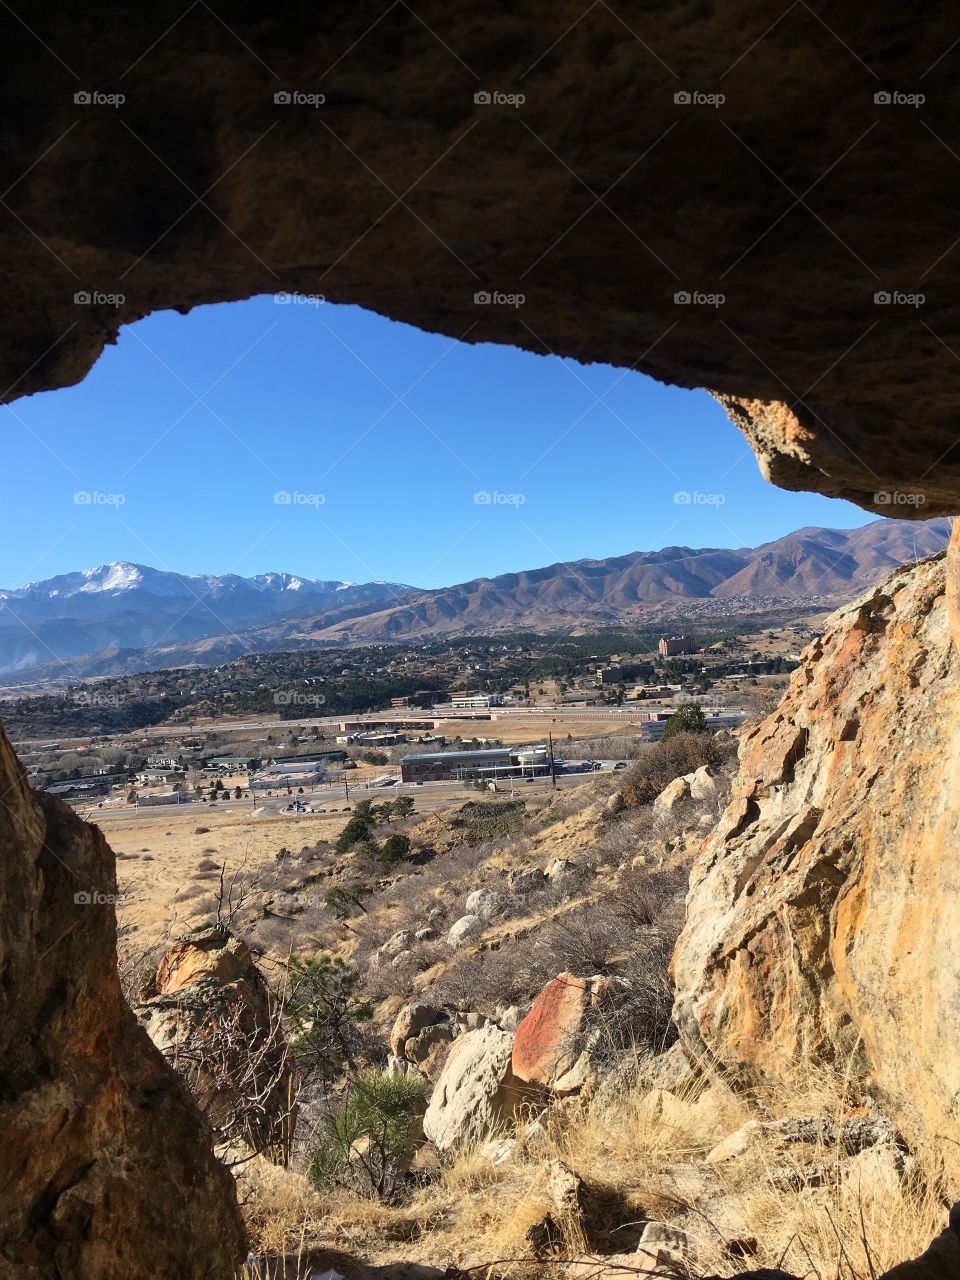 Looking at Pikes Peak out of a cave